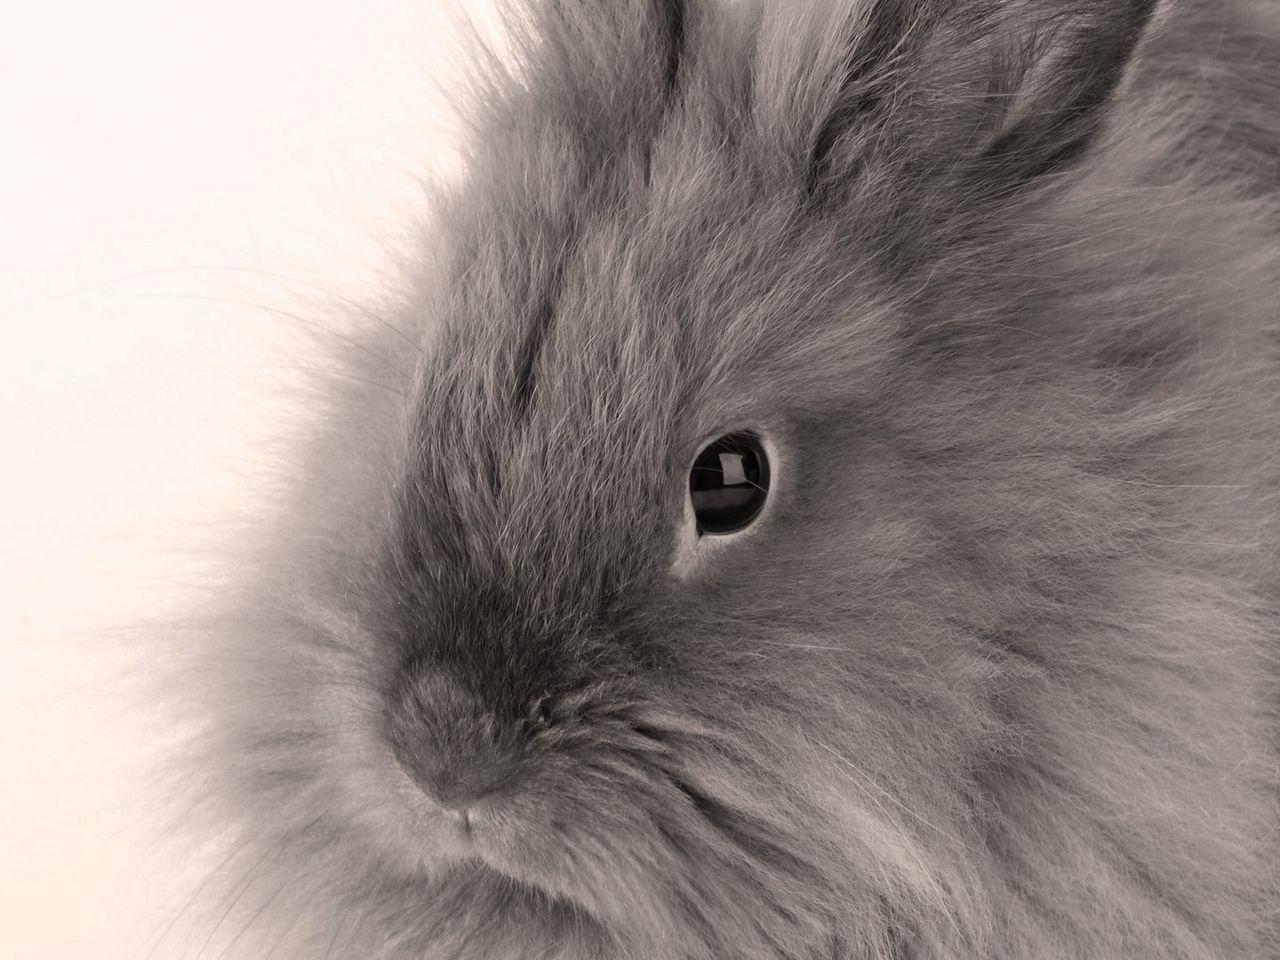 Download wallpaper 1280x960 gray, baby, bunny, fluffy standard 4:3 HD background